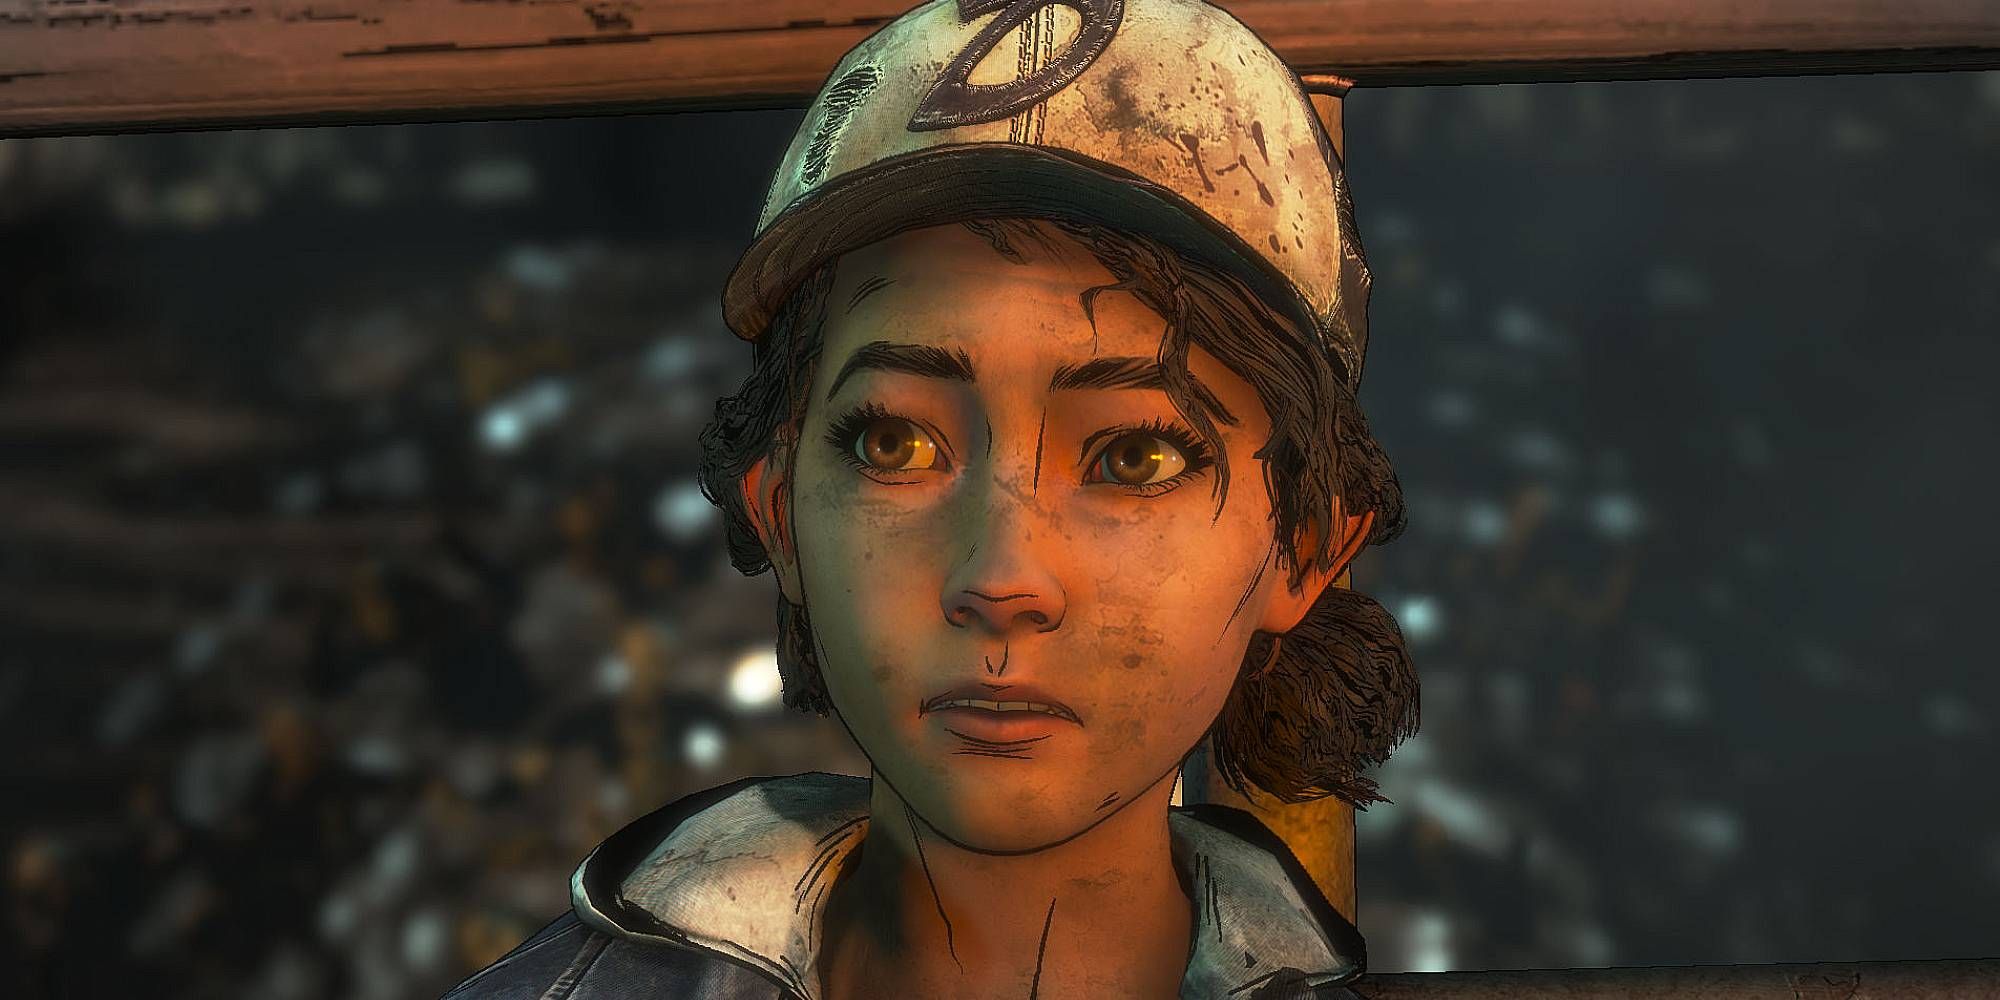 A tan young woman wearing a bloodied hat stares ahead